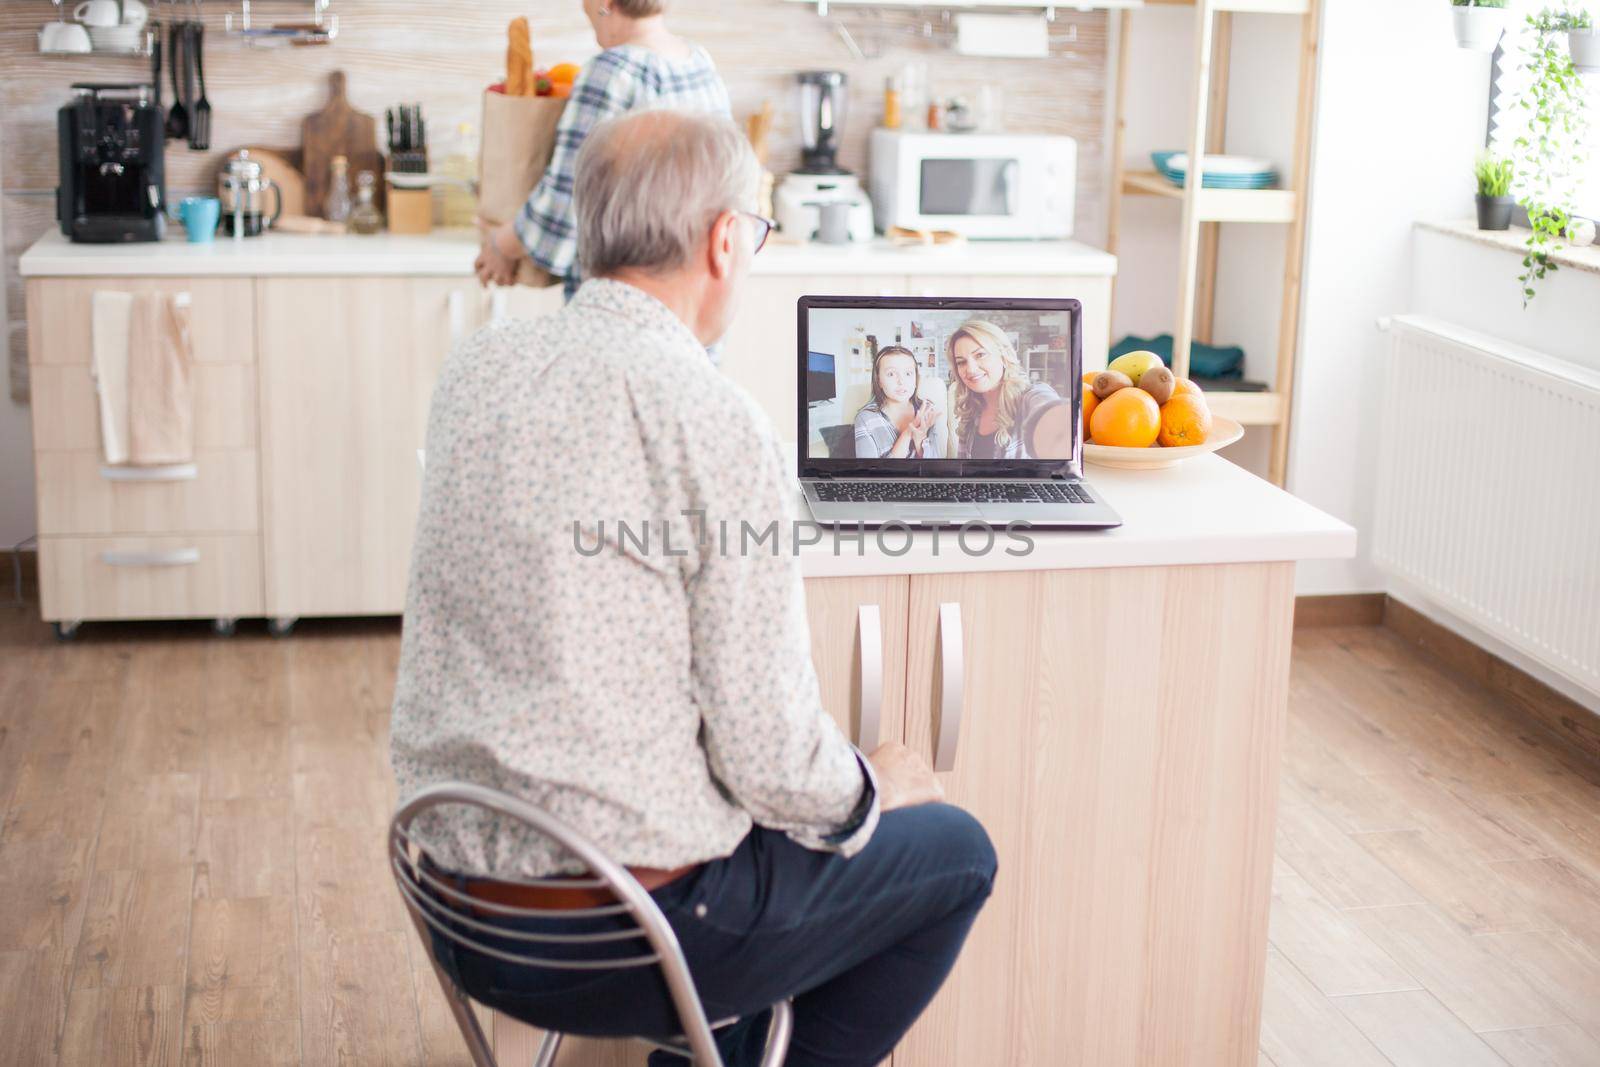 Senior man talking with niece on video call in the kitchen. Happy senior man during a video conference with family using laptop in kitchen. Online call with daughter and niece. Elderly person using modern communication online internet web techonolgy.